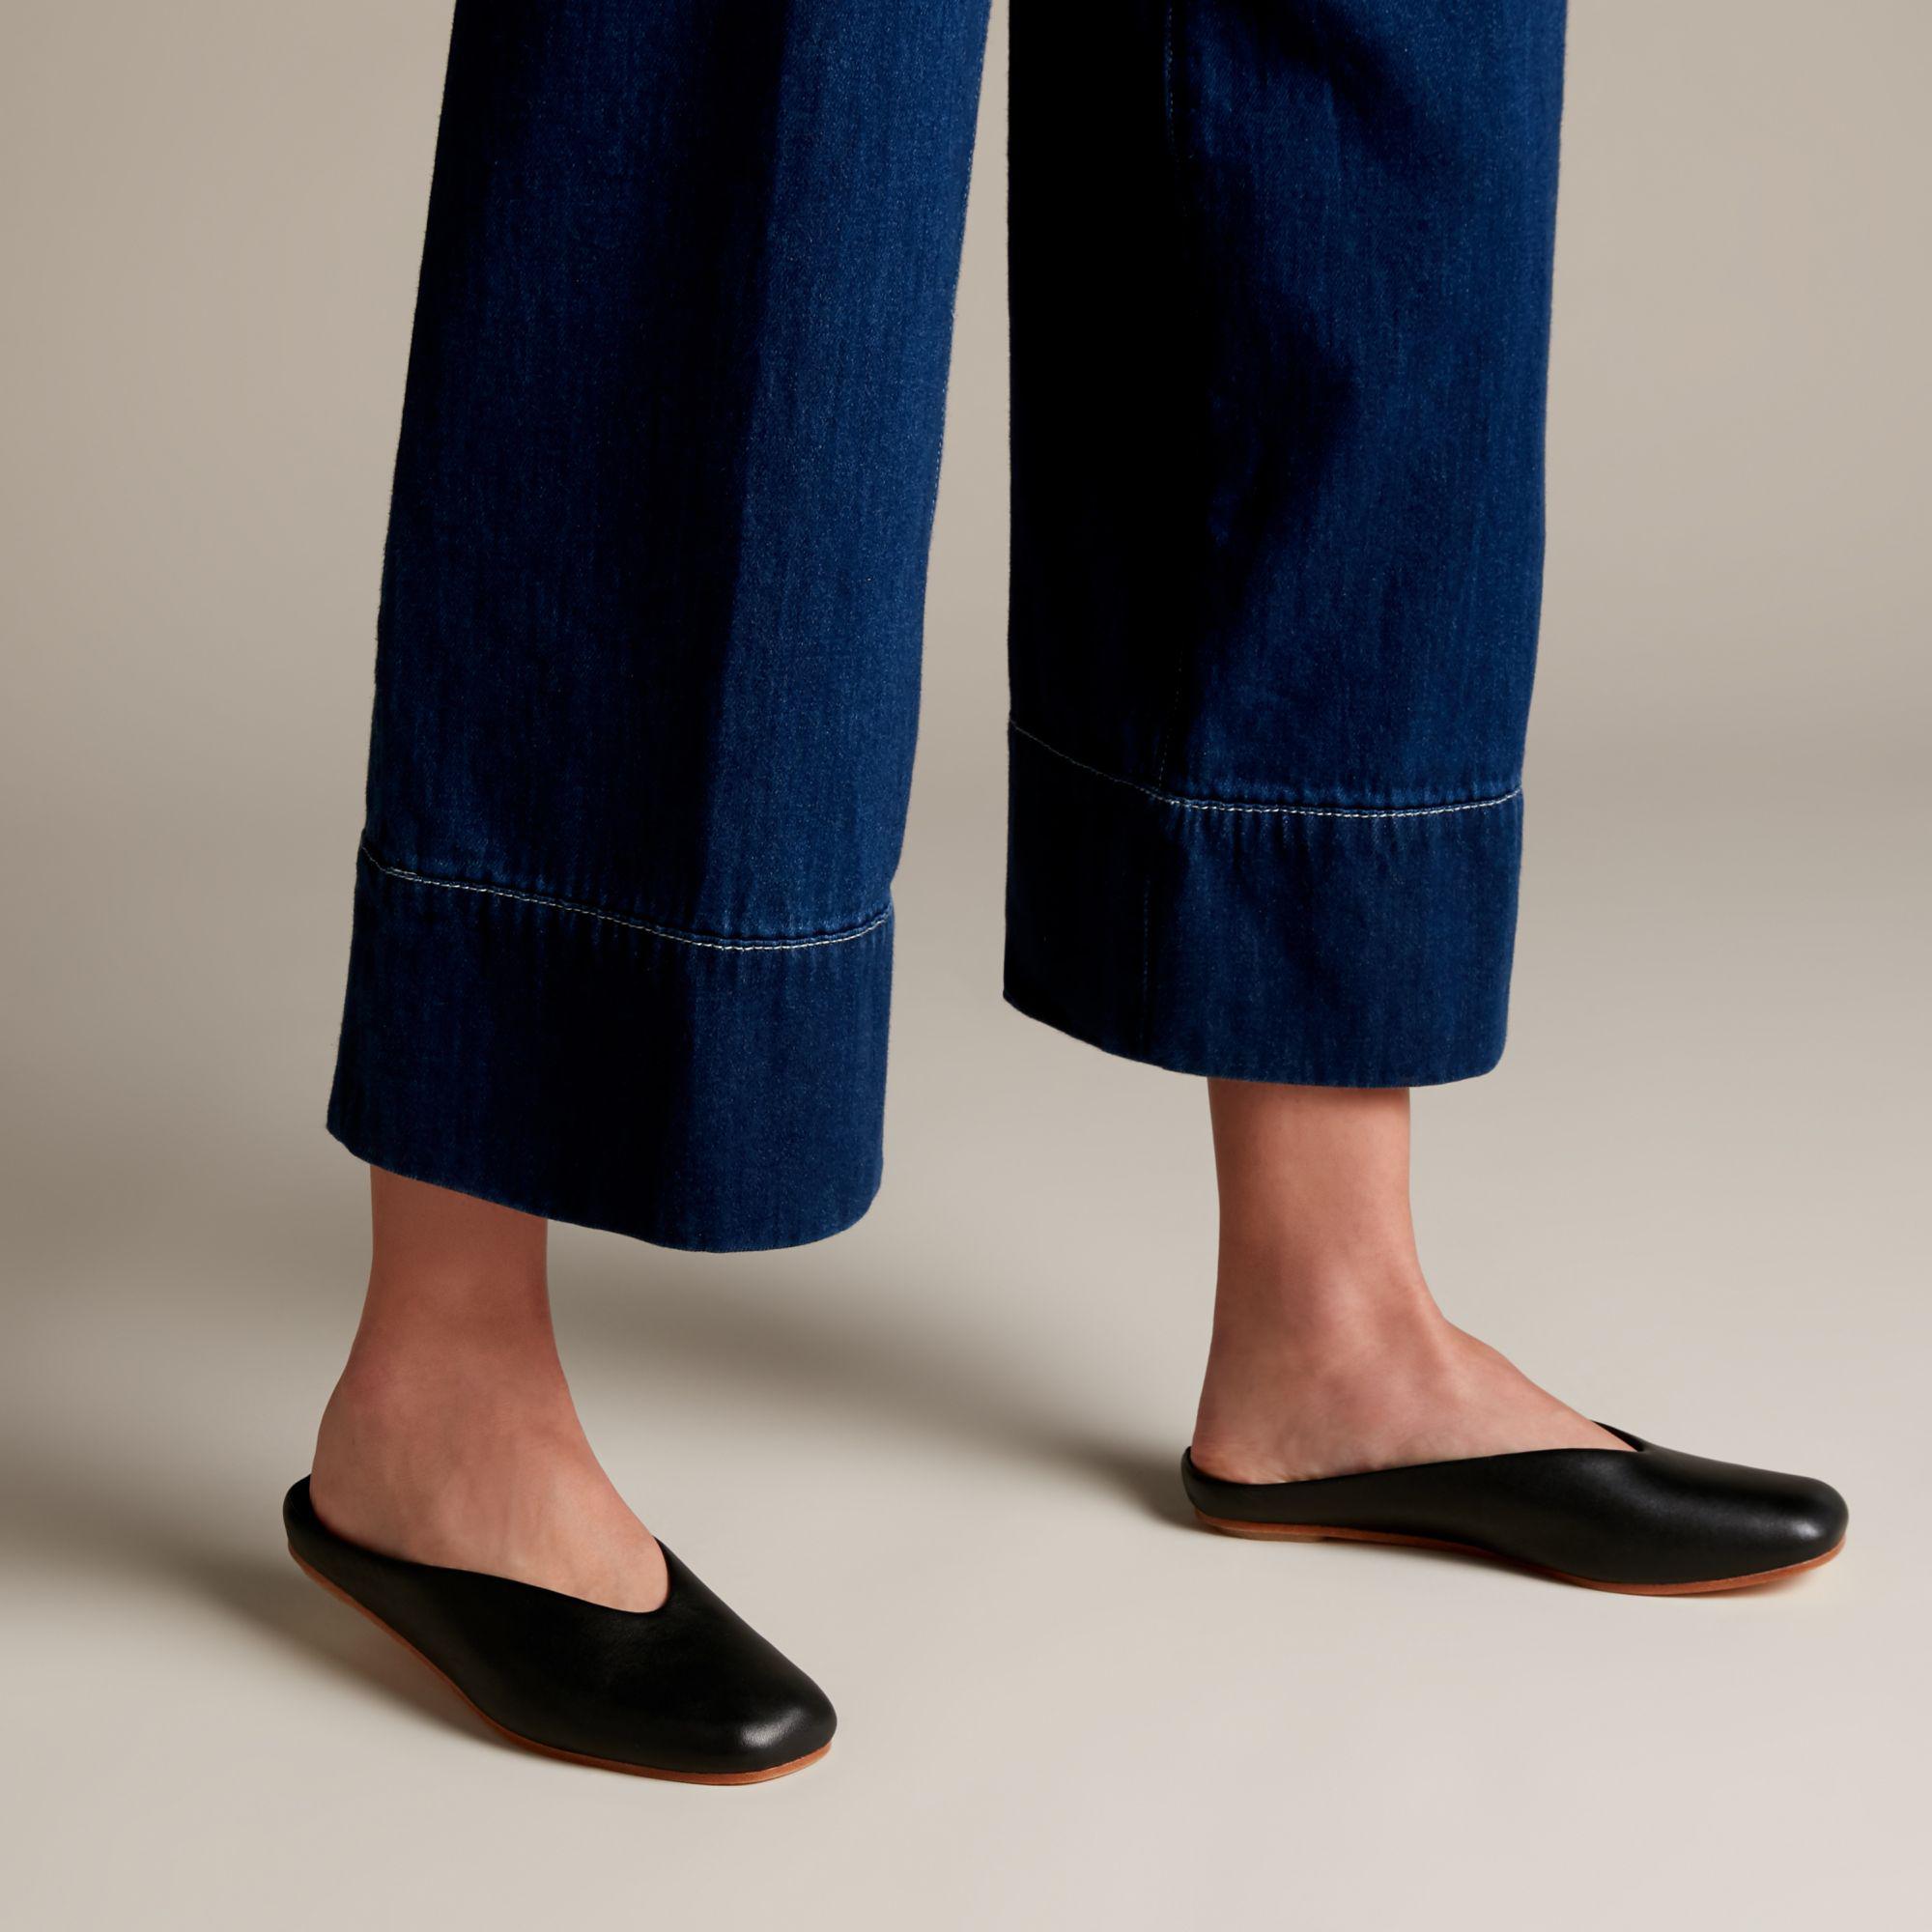 clarks leather mules